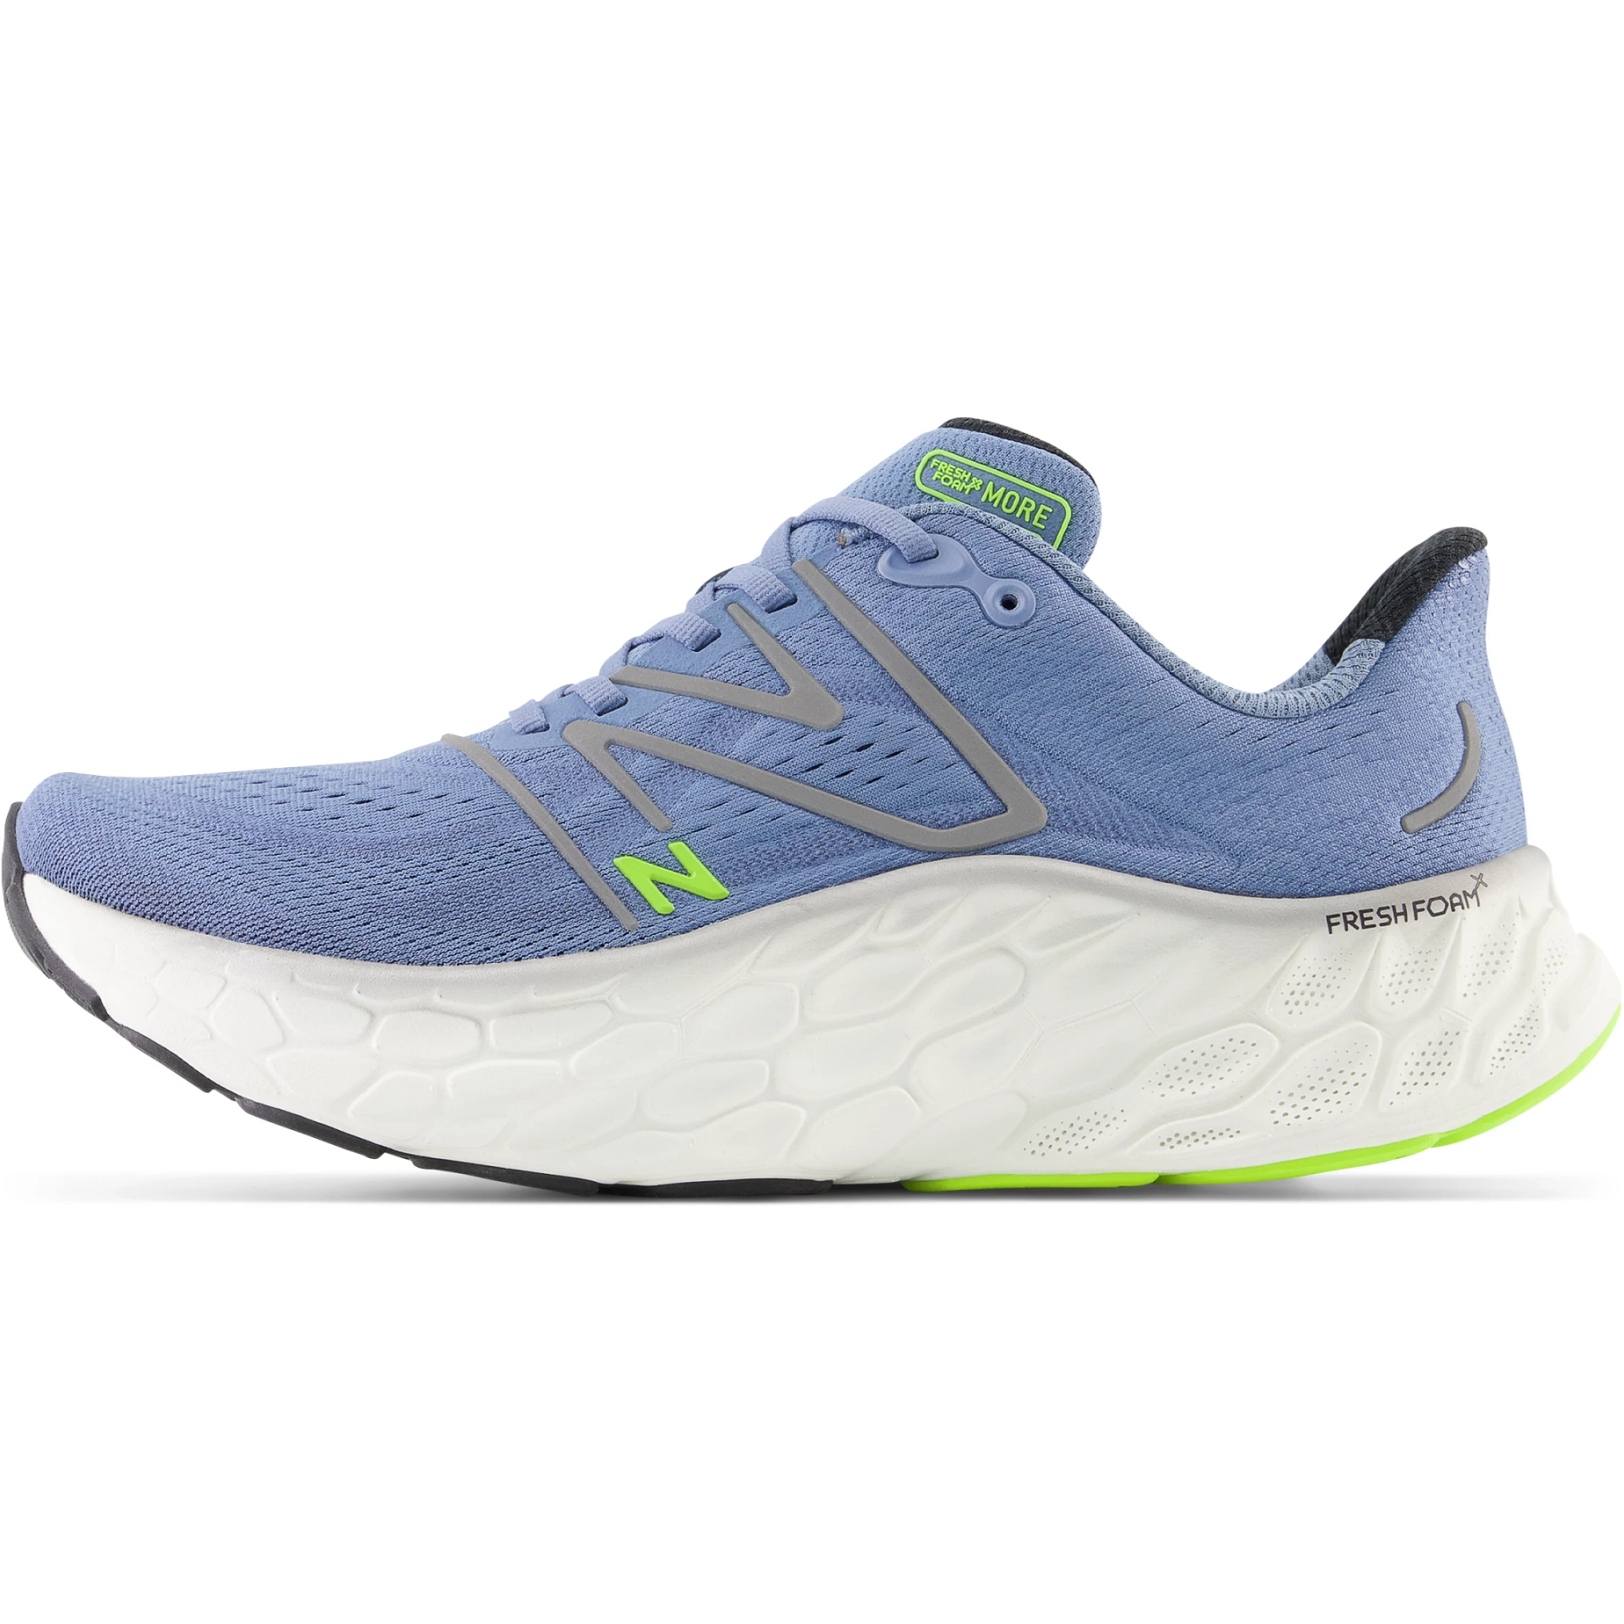 Picture of New Balance Fresh Foam X More v4 Running Shoes - Mercury Blue/Dark Silver Metal